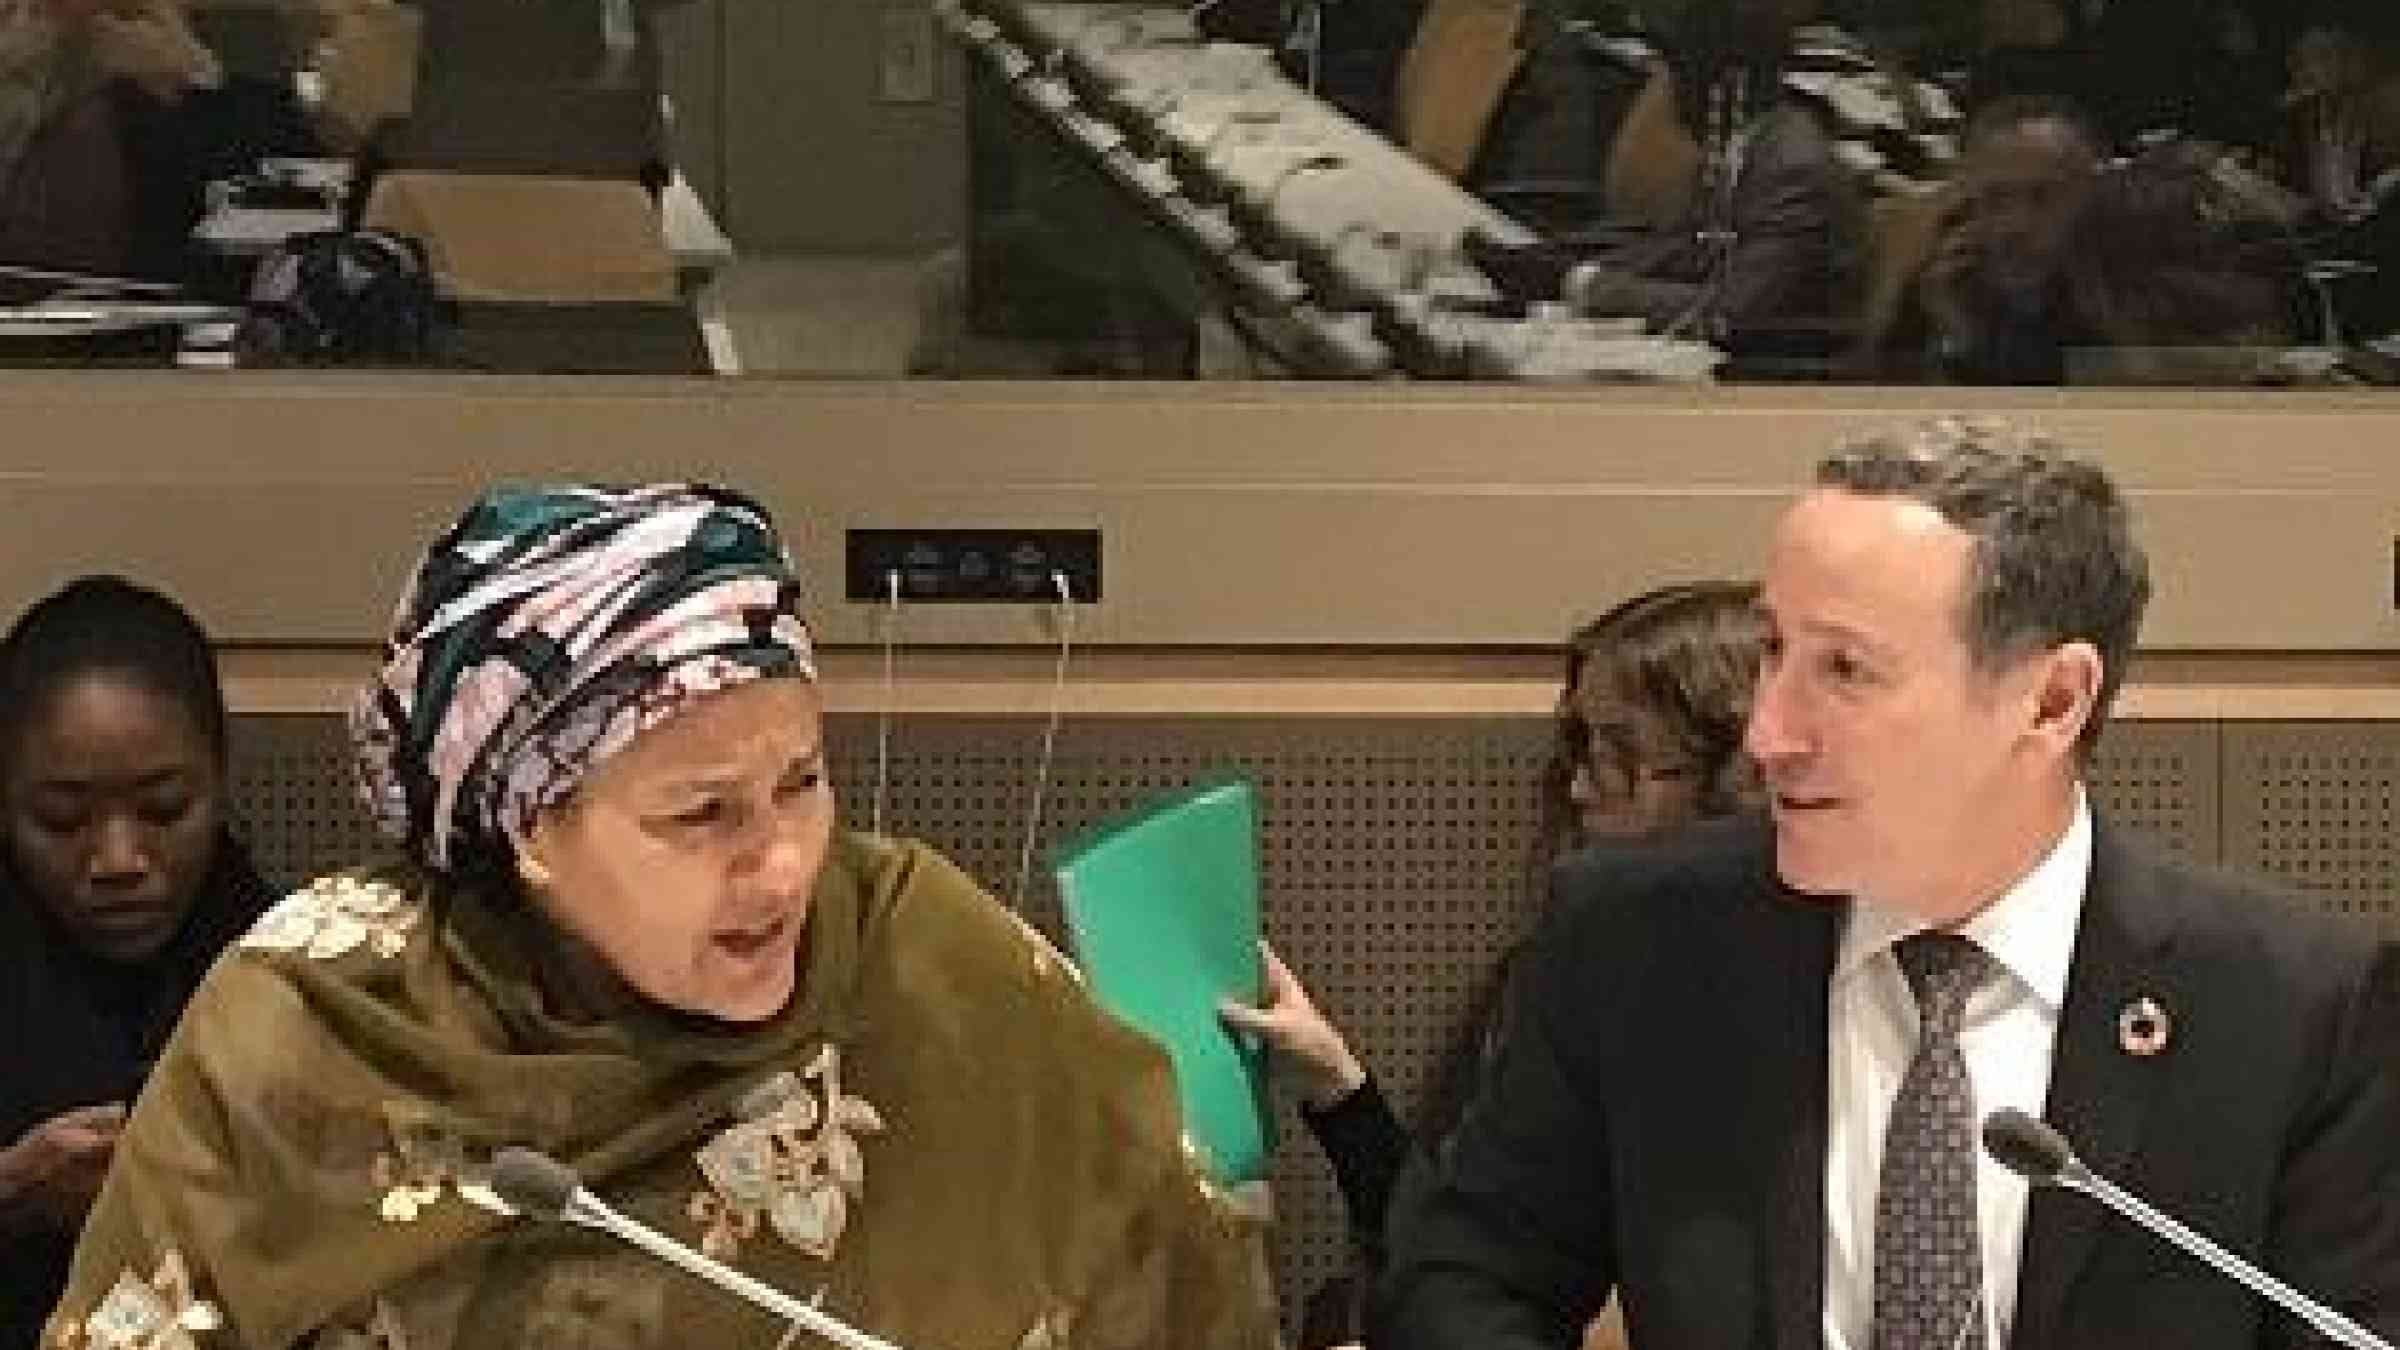 The UN Deputy Secretary-General, Ms. Amina J. Mohammed in discussion with UNISDR head, Mr. Robert Glasser, at this week's tsunami event in New York